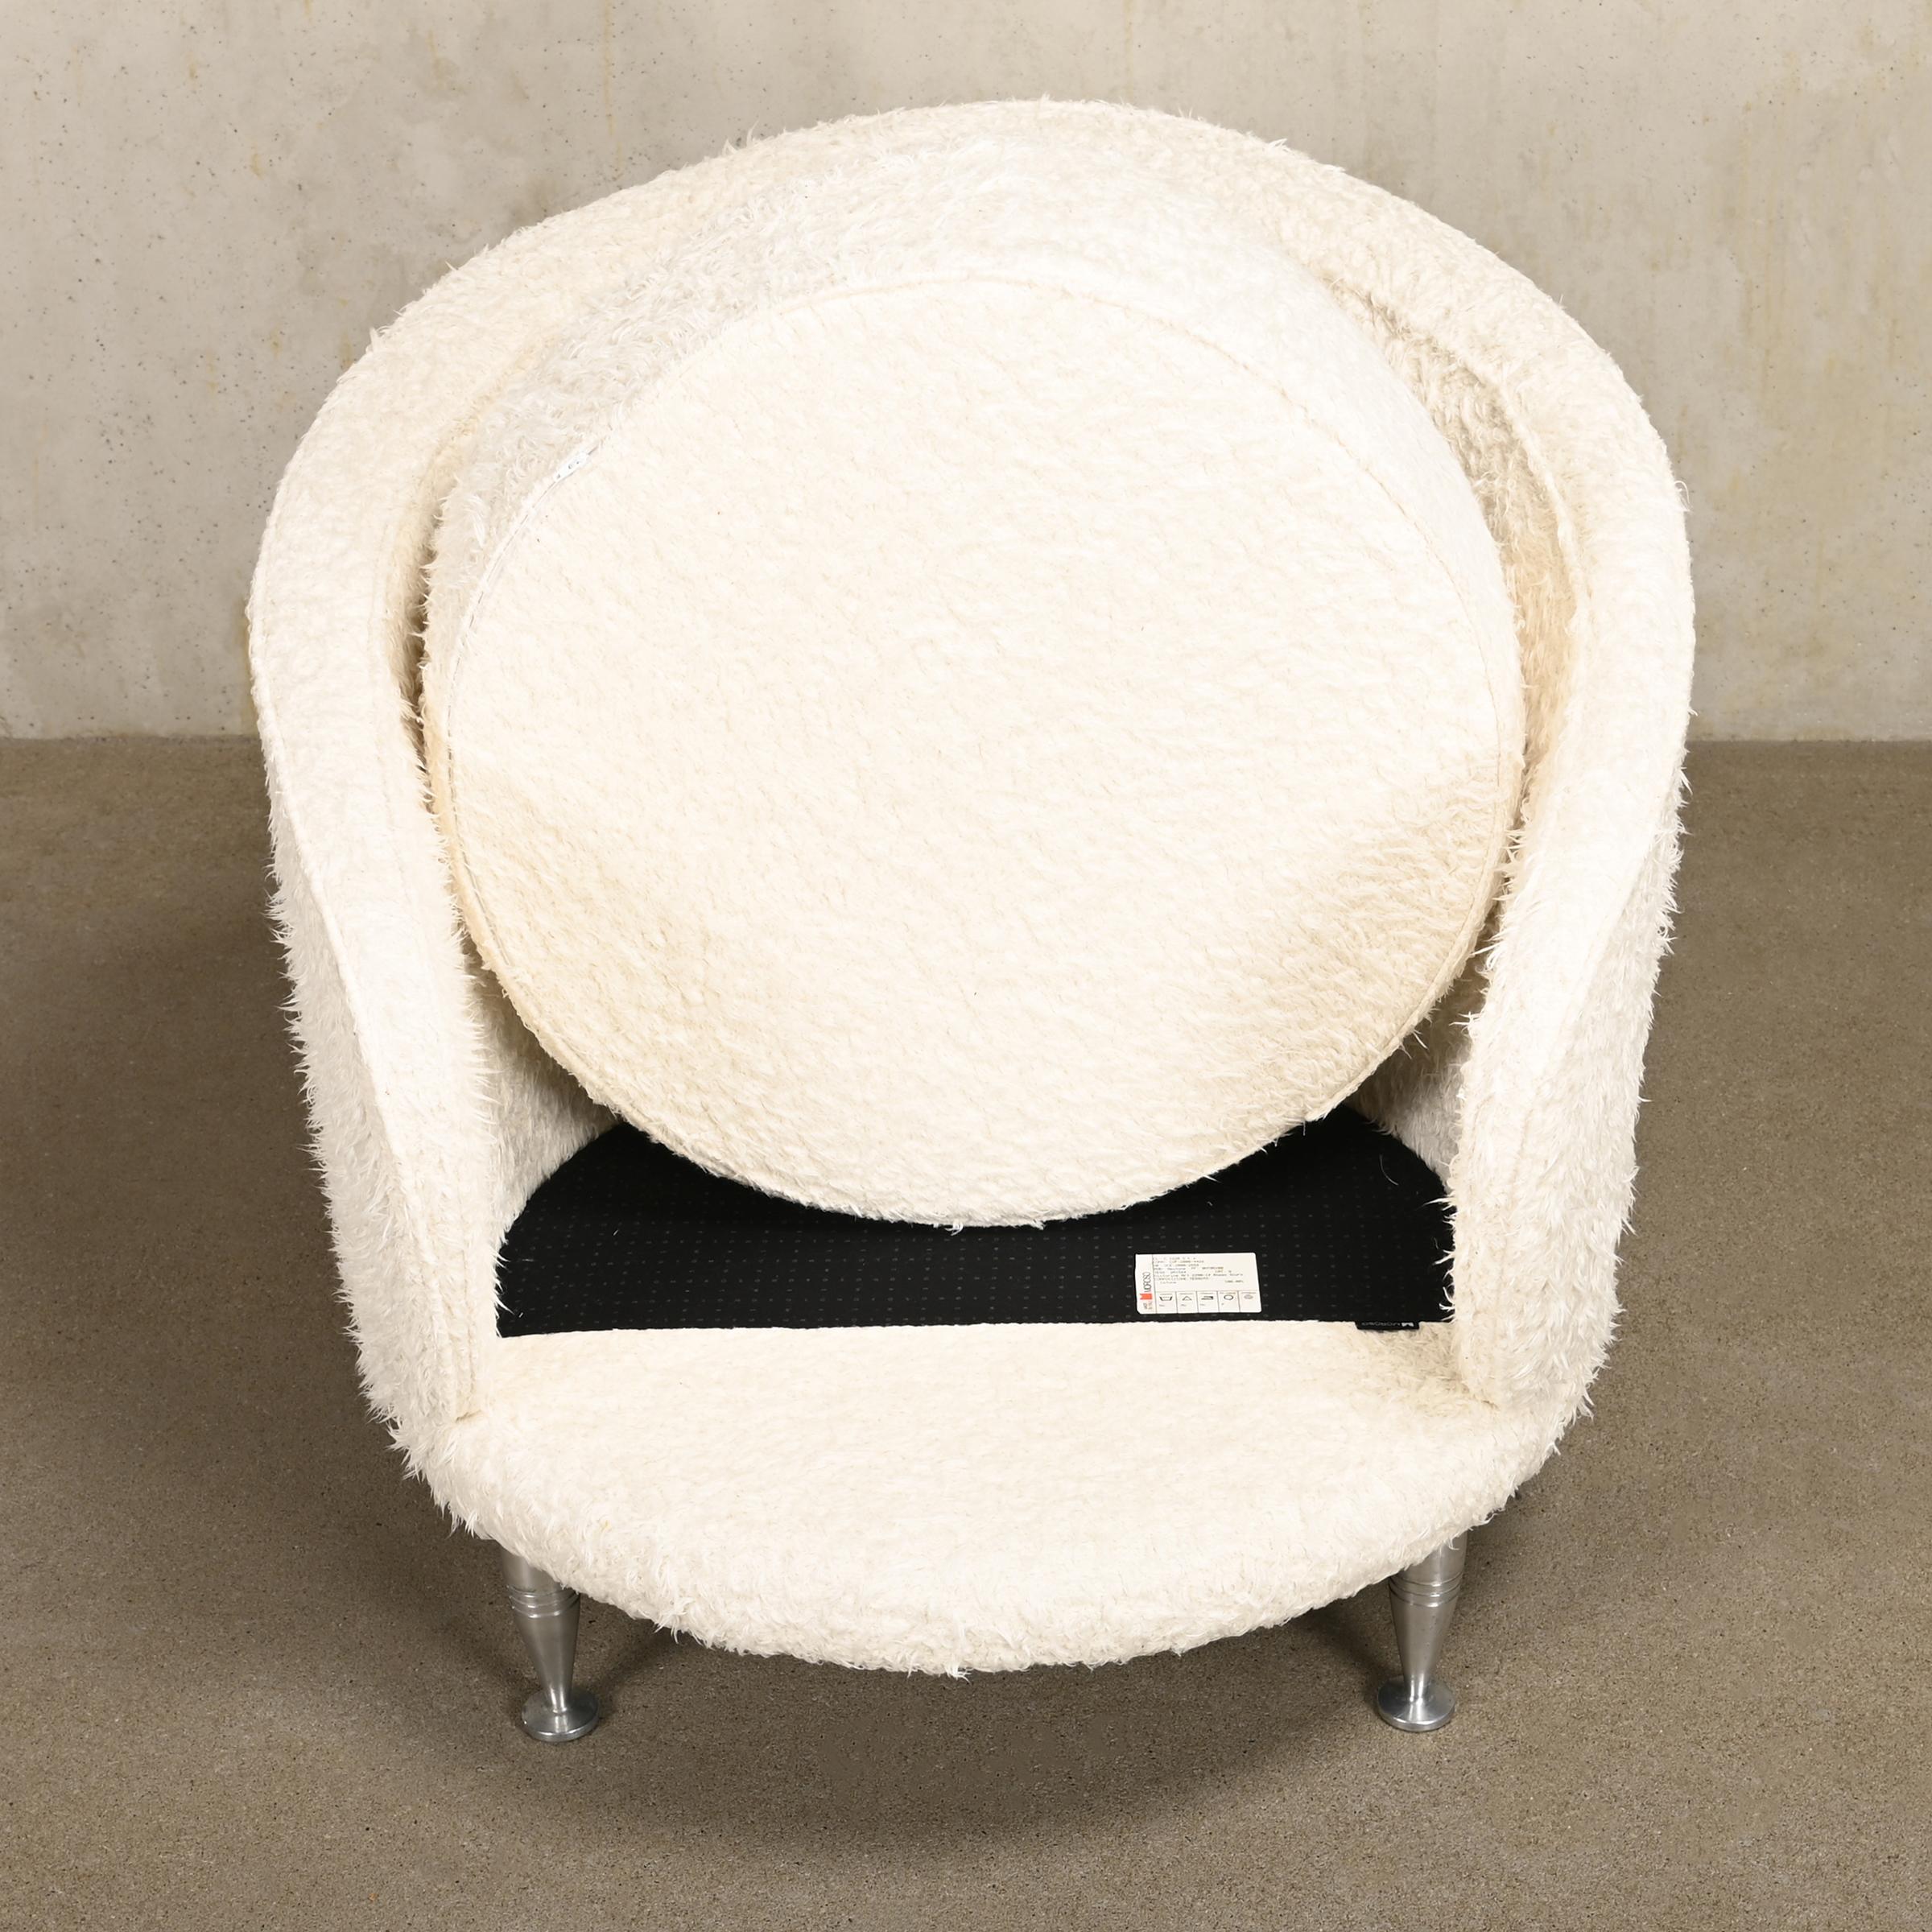 Massimo Iosa Ghini Armchair New Tone in white long pile cotton for Moroso, Italy 7